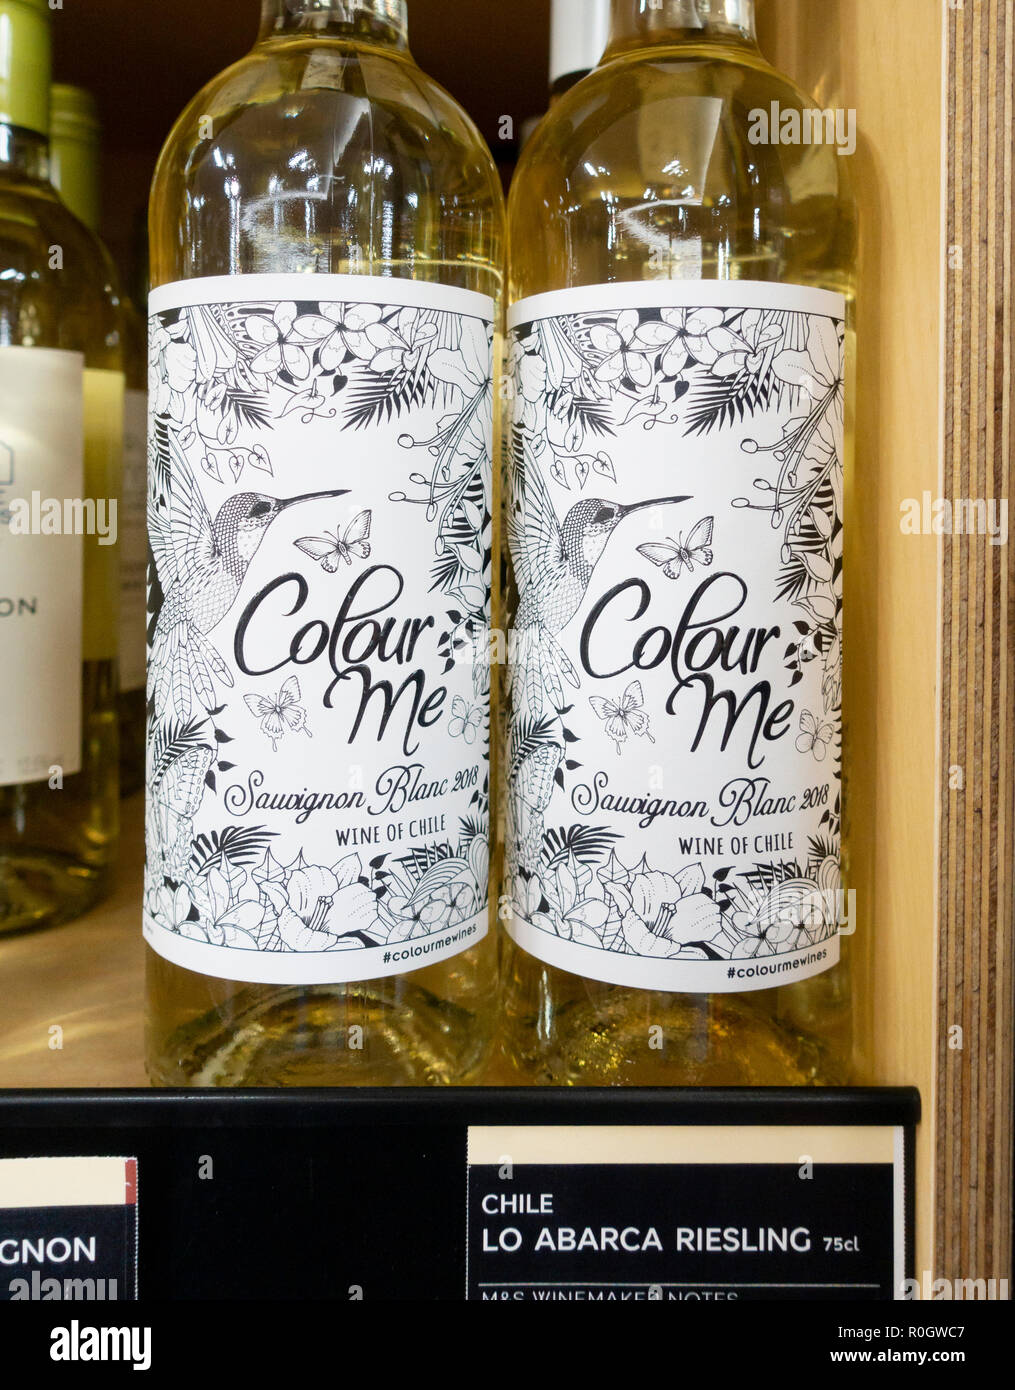 Colour me wine in M&S/Marks & Spencer store. UK Stock Photo